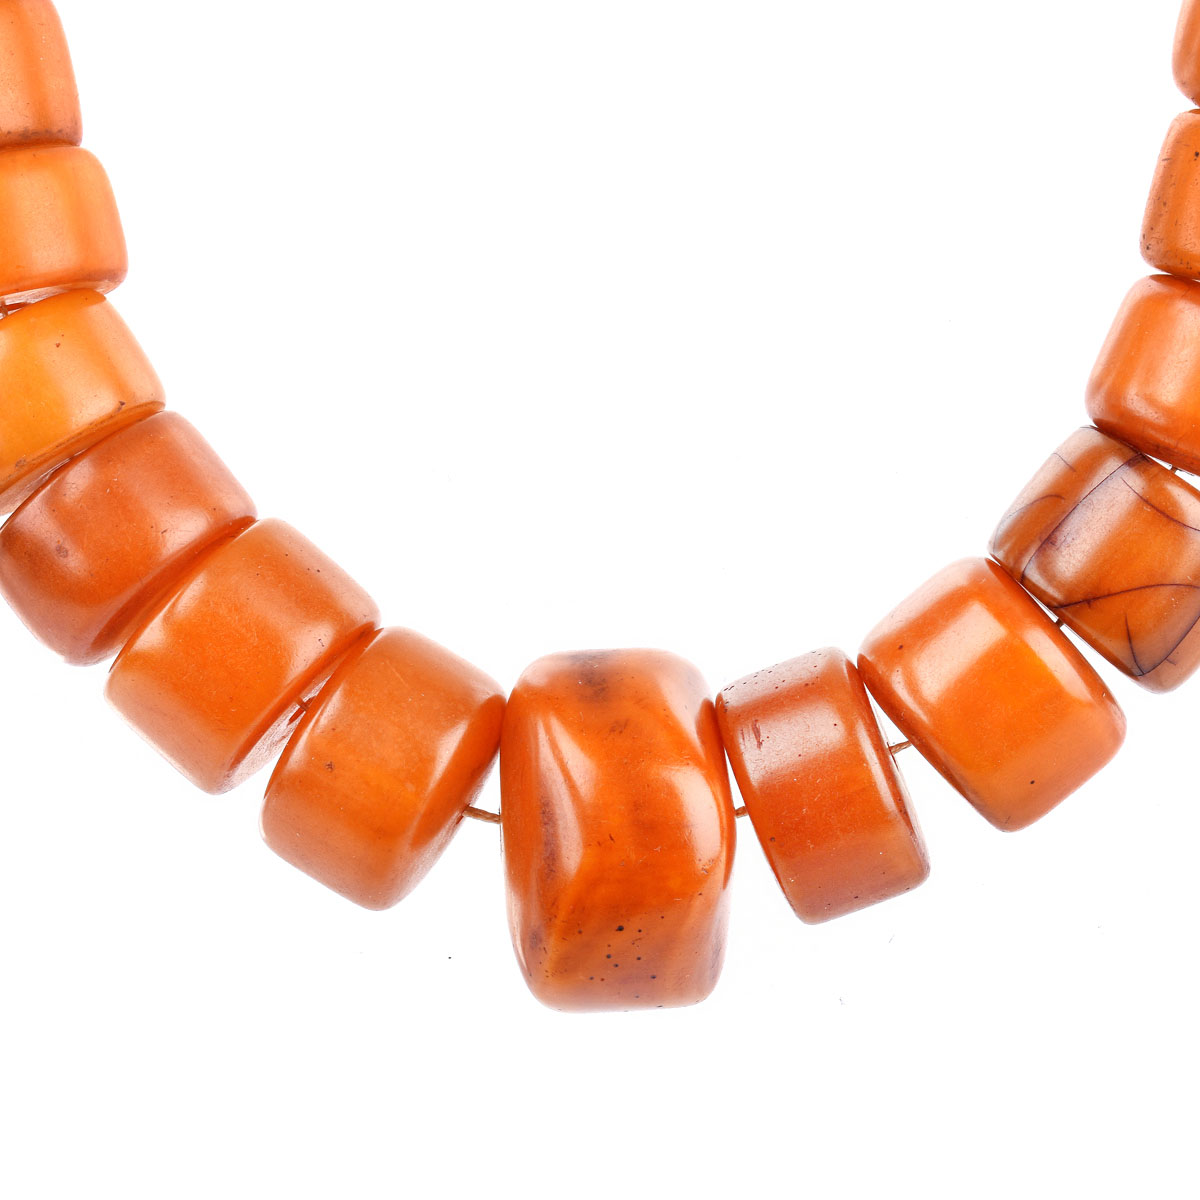 Large Antique Graduated Amber Beaded Necklace, Possibly Tibetan. Natural deep color tones with typical stress lines to a few beads overall good condition.